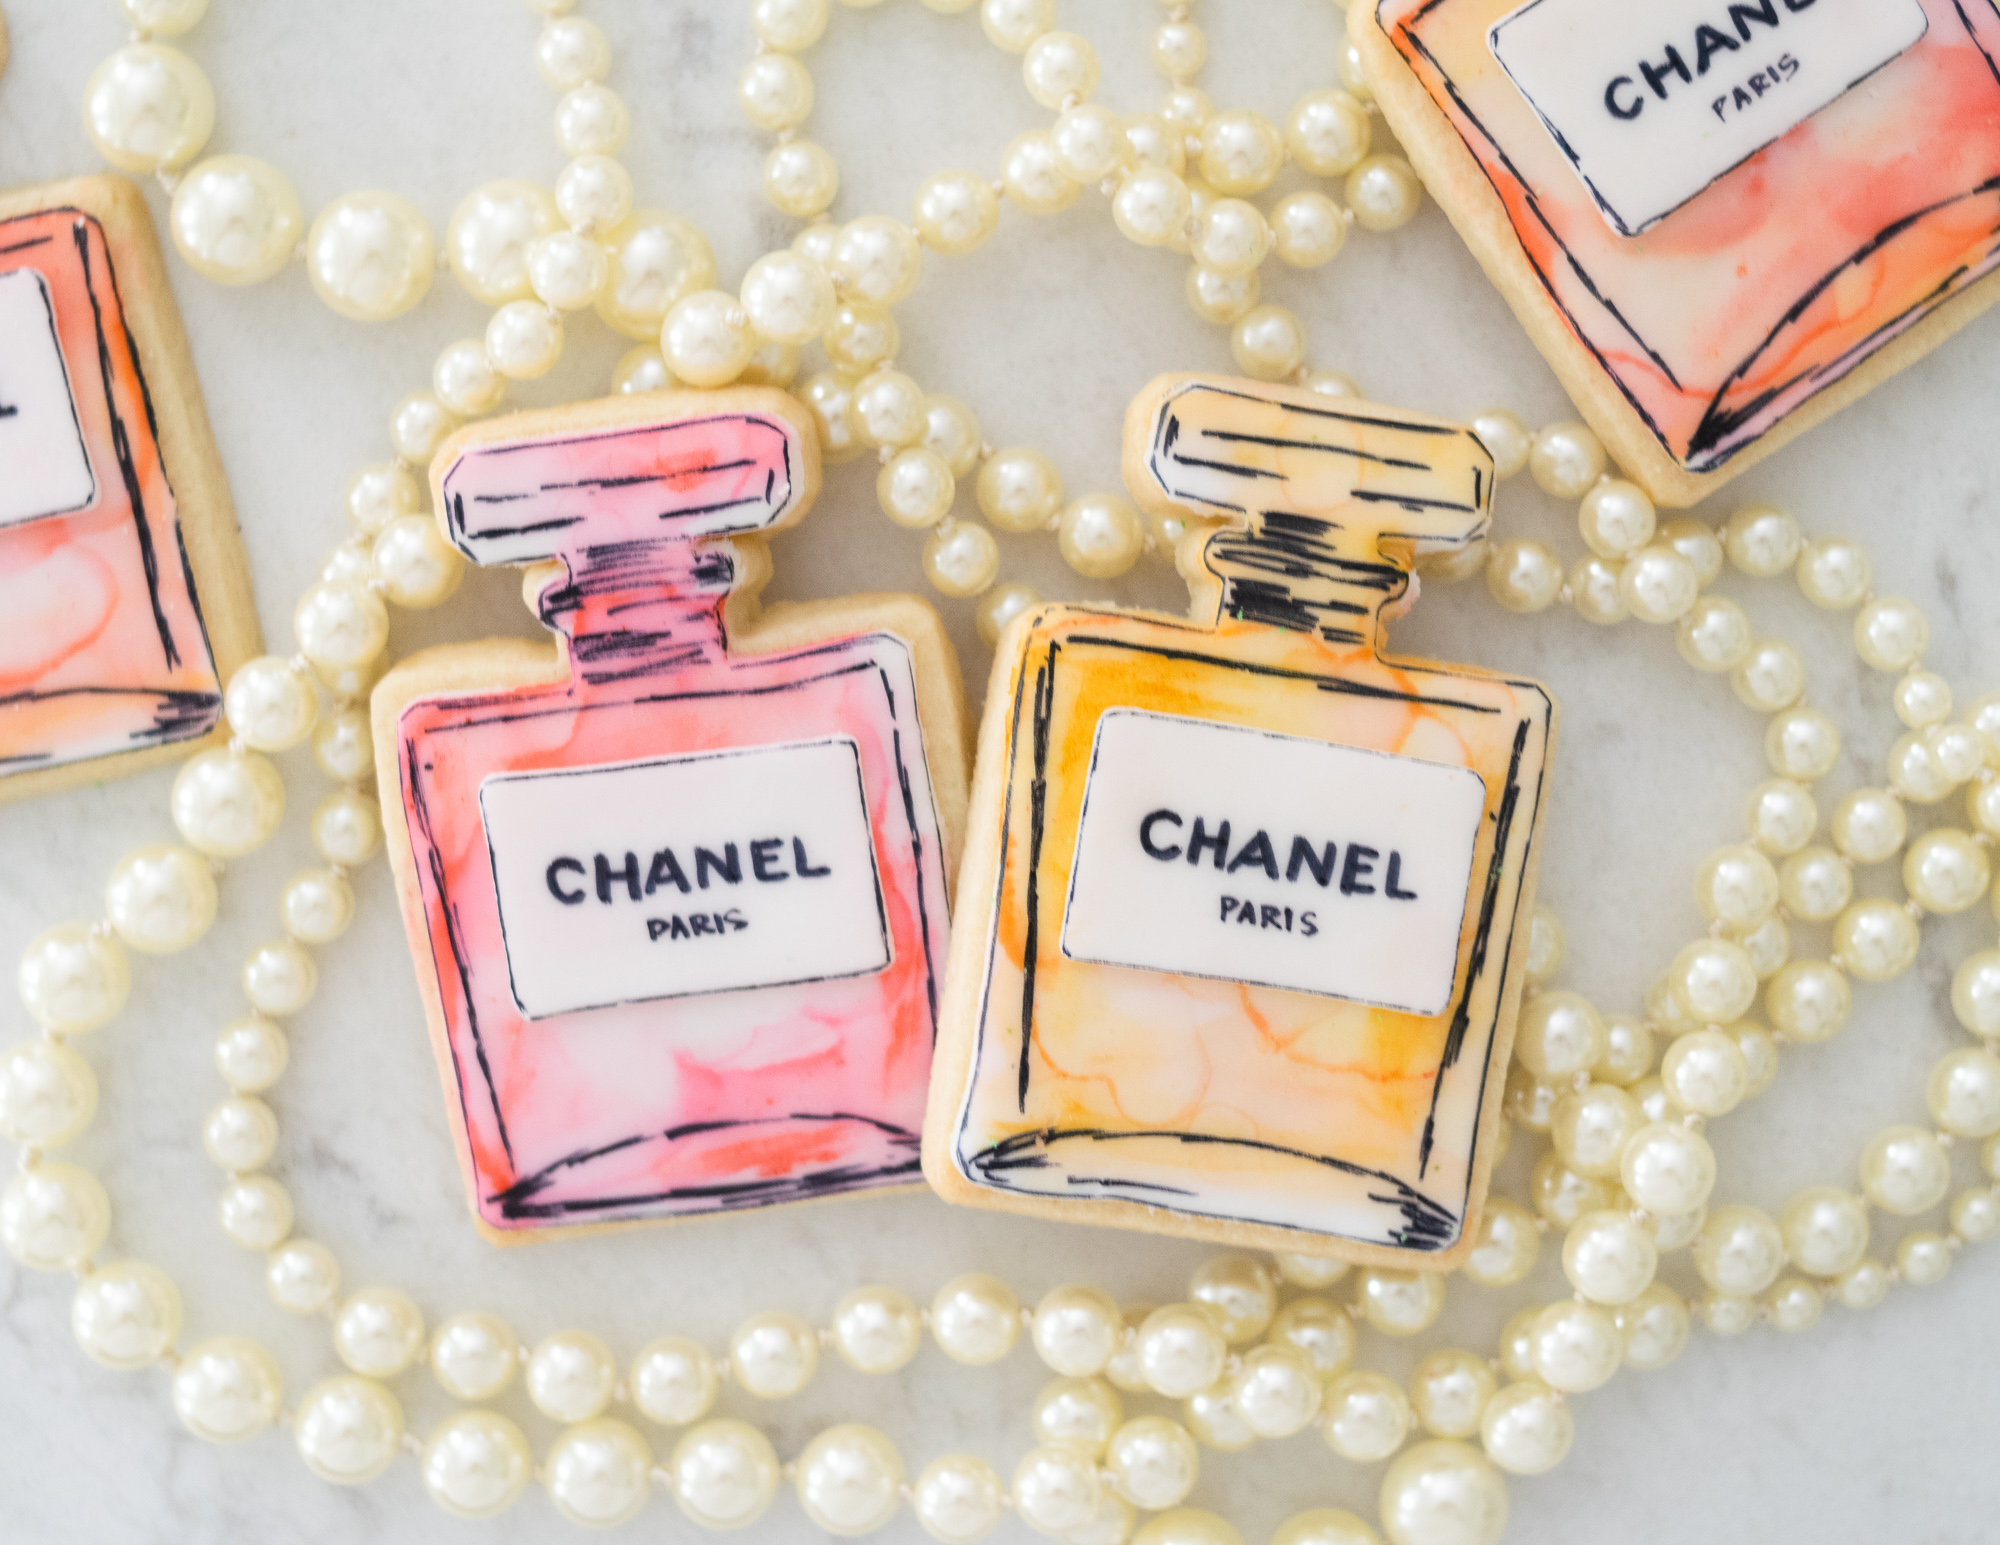 Chanel Perfume Bottle Coloring Page Coloring Pages